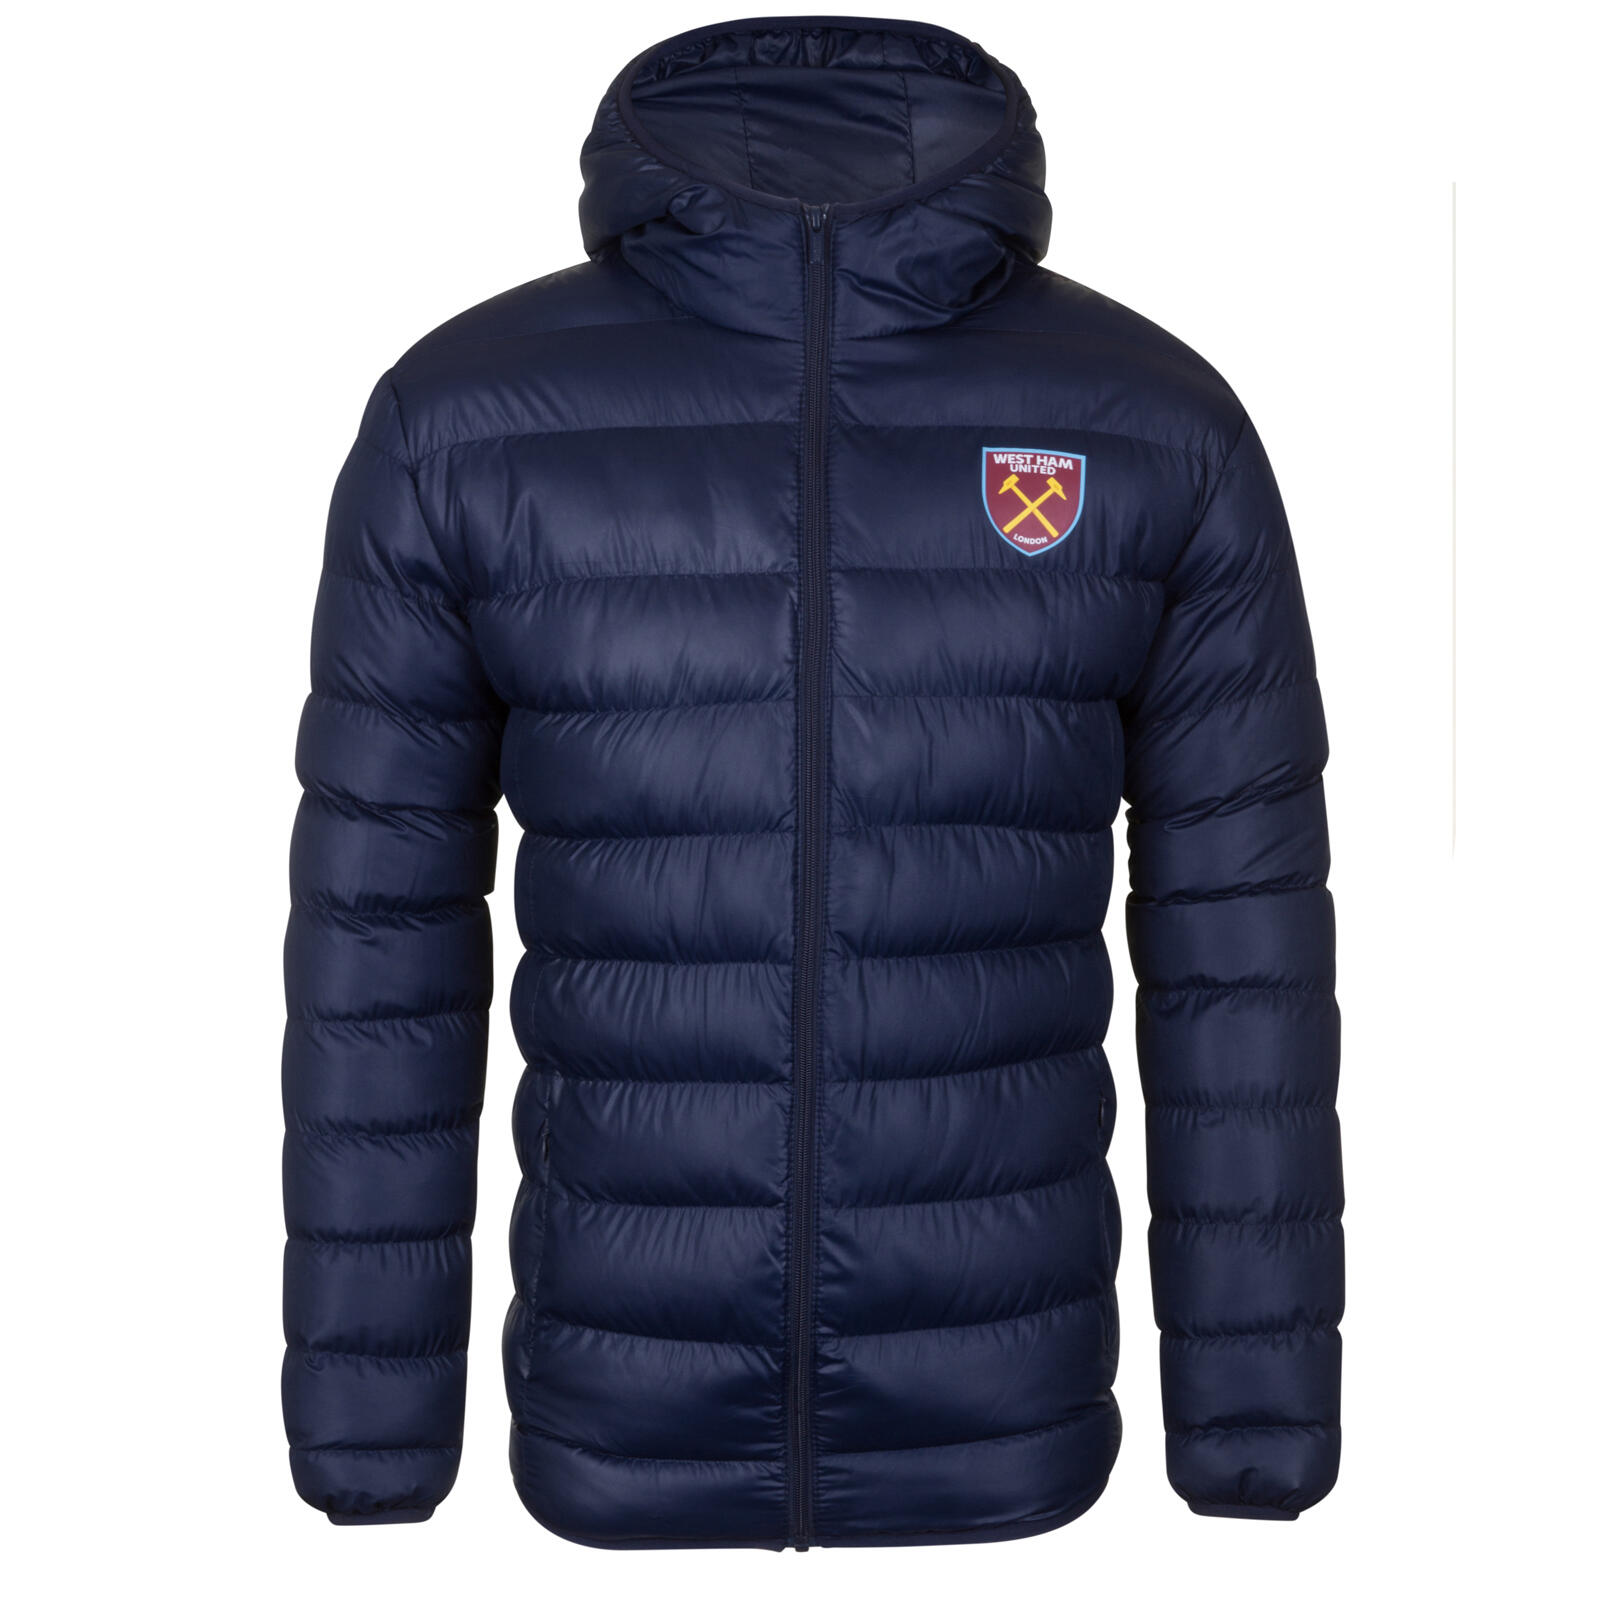 WEST HAM UNITED West Ham United Mens Jacket Hooded Winter Quilted OFFICIAL Football Gift